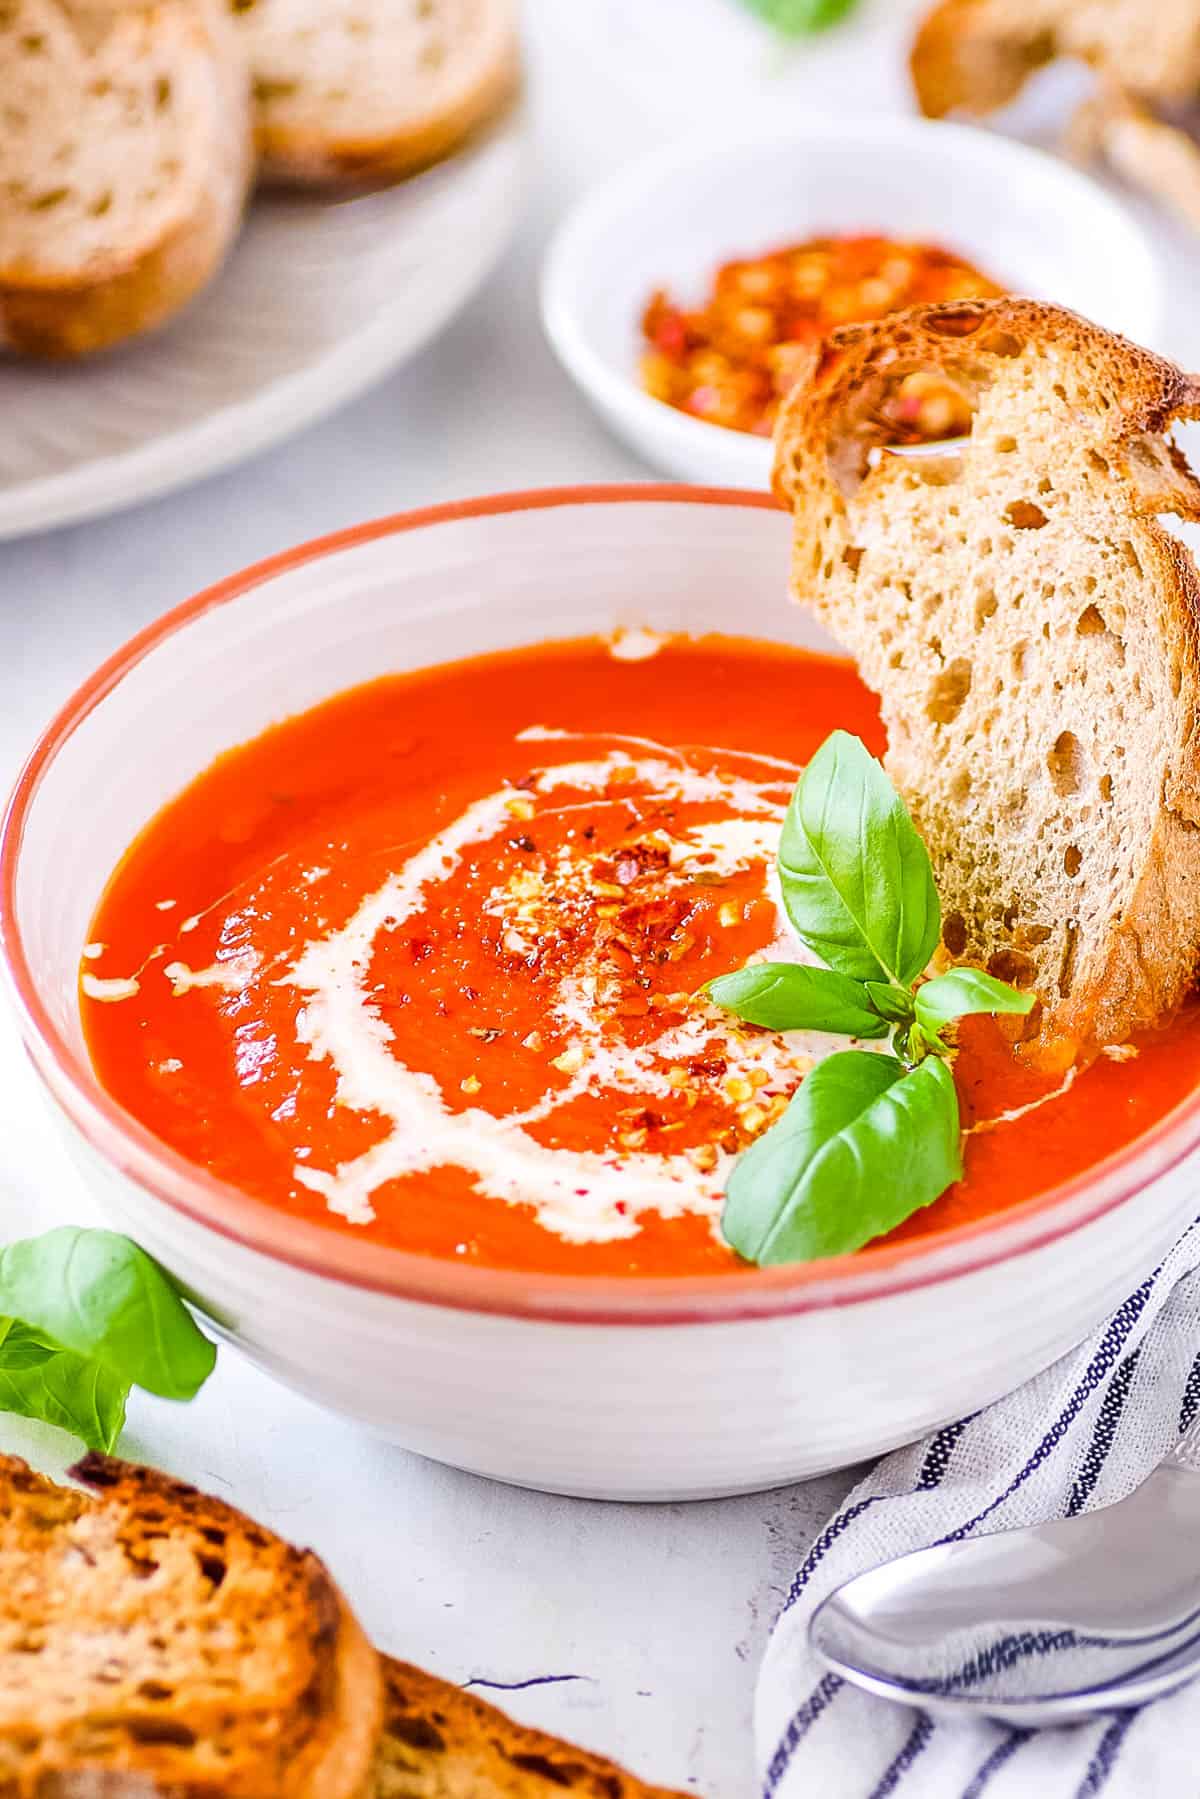 Three-ingredient tomato soup made with canned tomatoes served in a white bowl with fresh basil and crusty bread as a side.